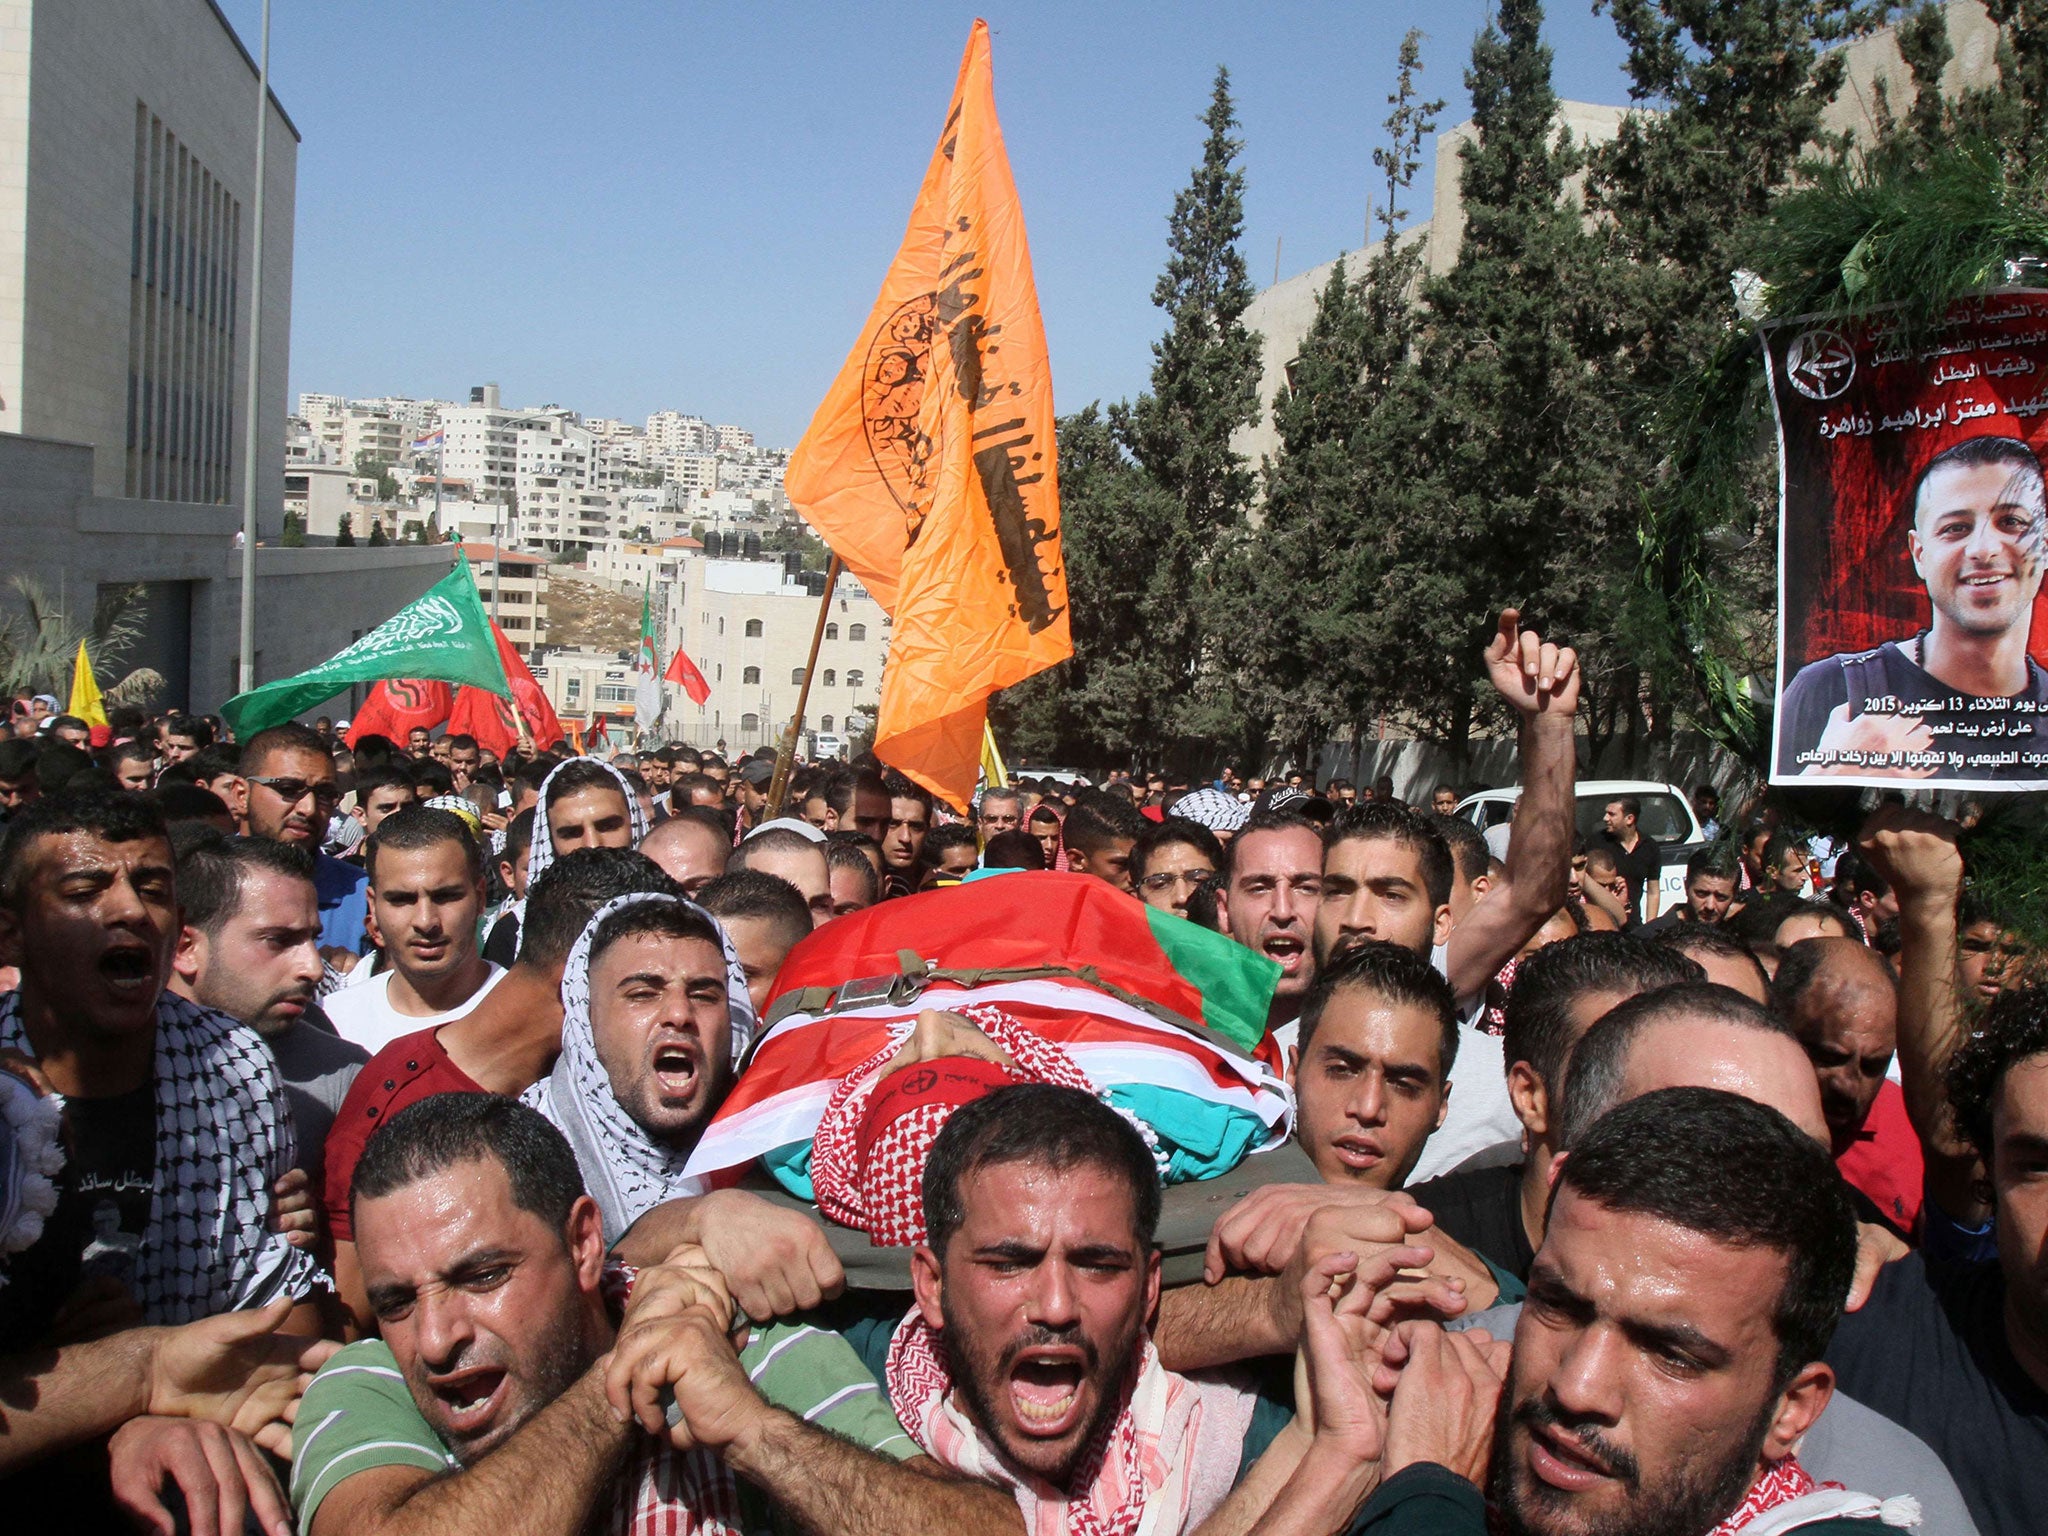 The funeral of Moataz Zawahra, a 28-year-old Palestinian who was killed in clashes with Israeli security forces, near Bethlehem on 14 October